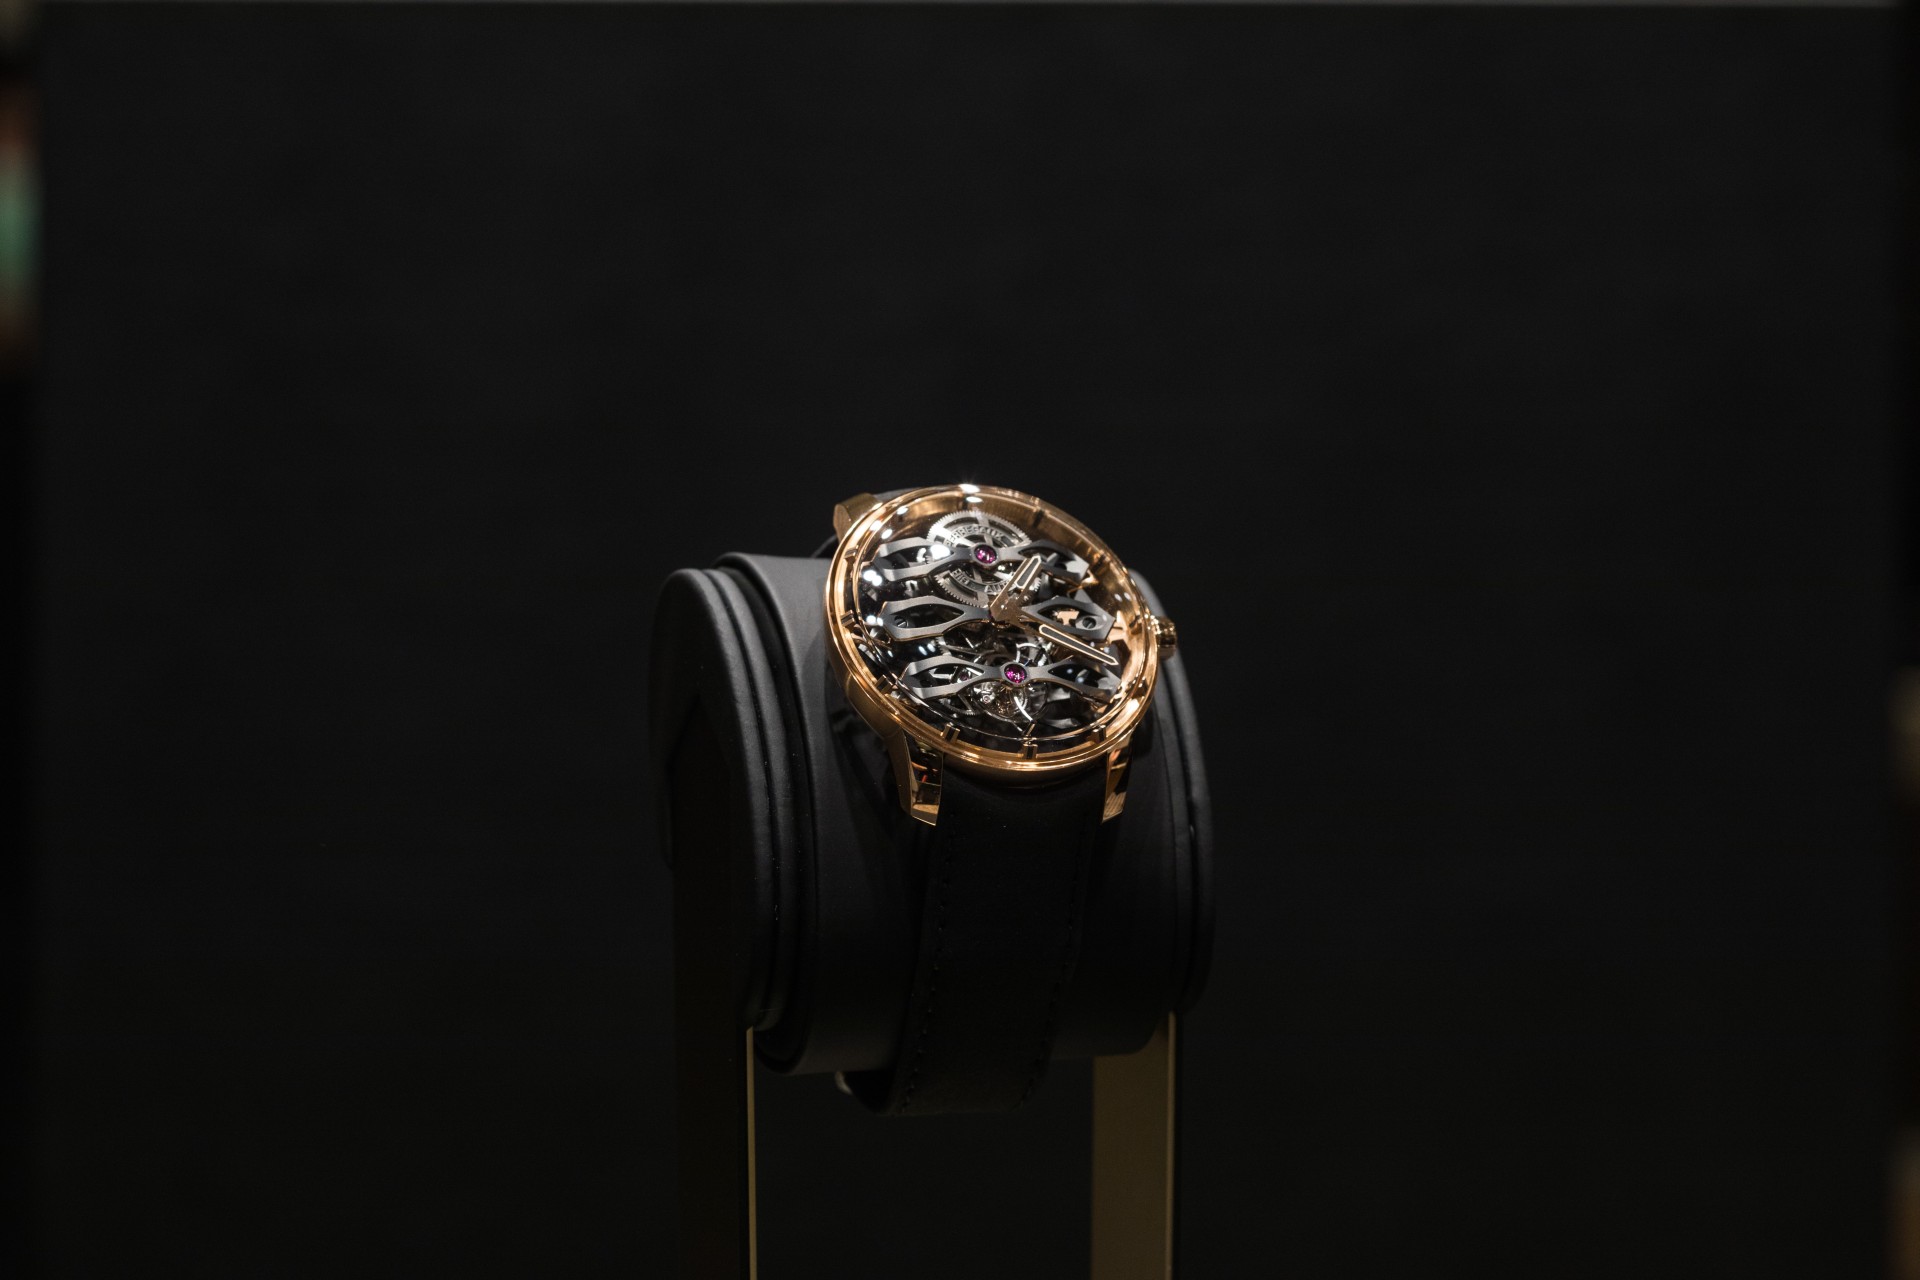 Girard Perregaux Shaping The Know since 1791